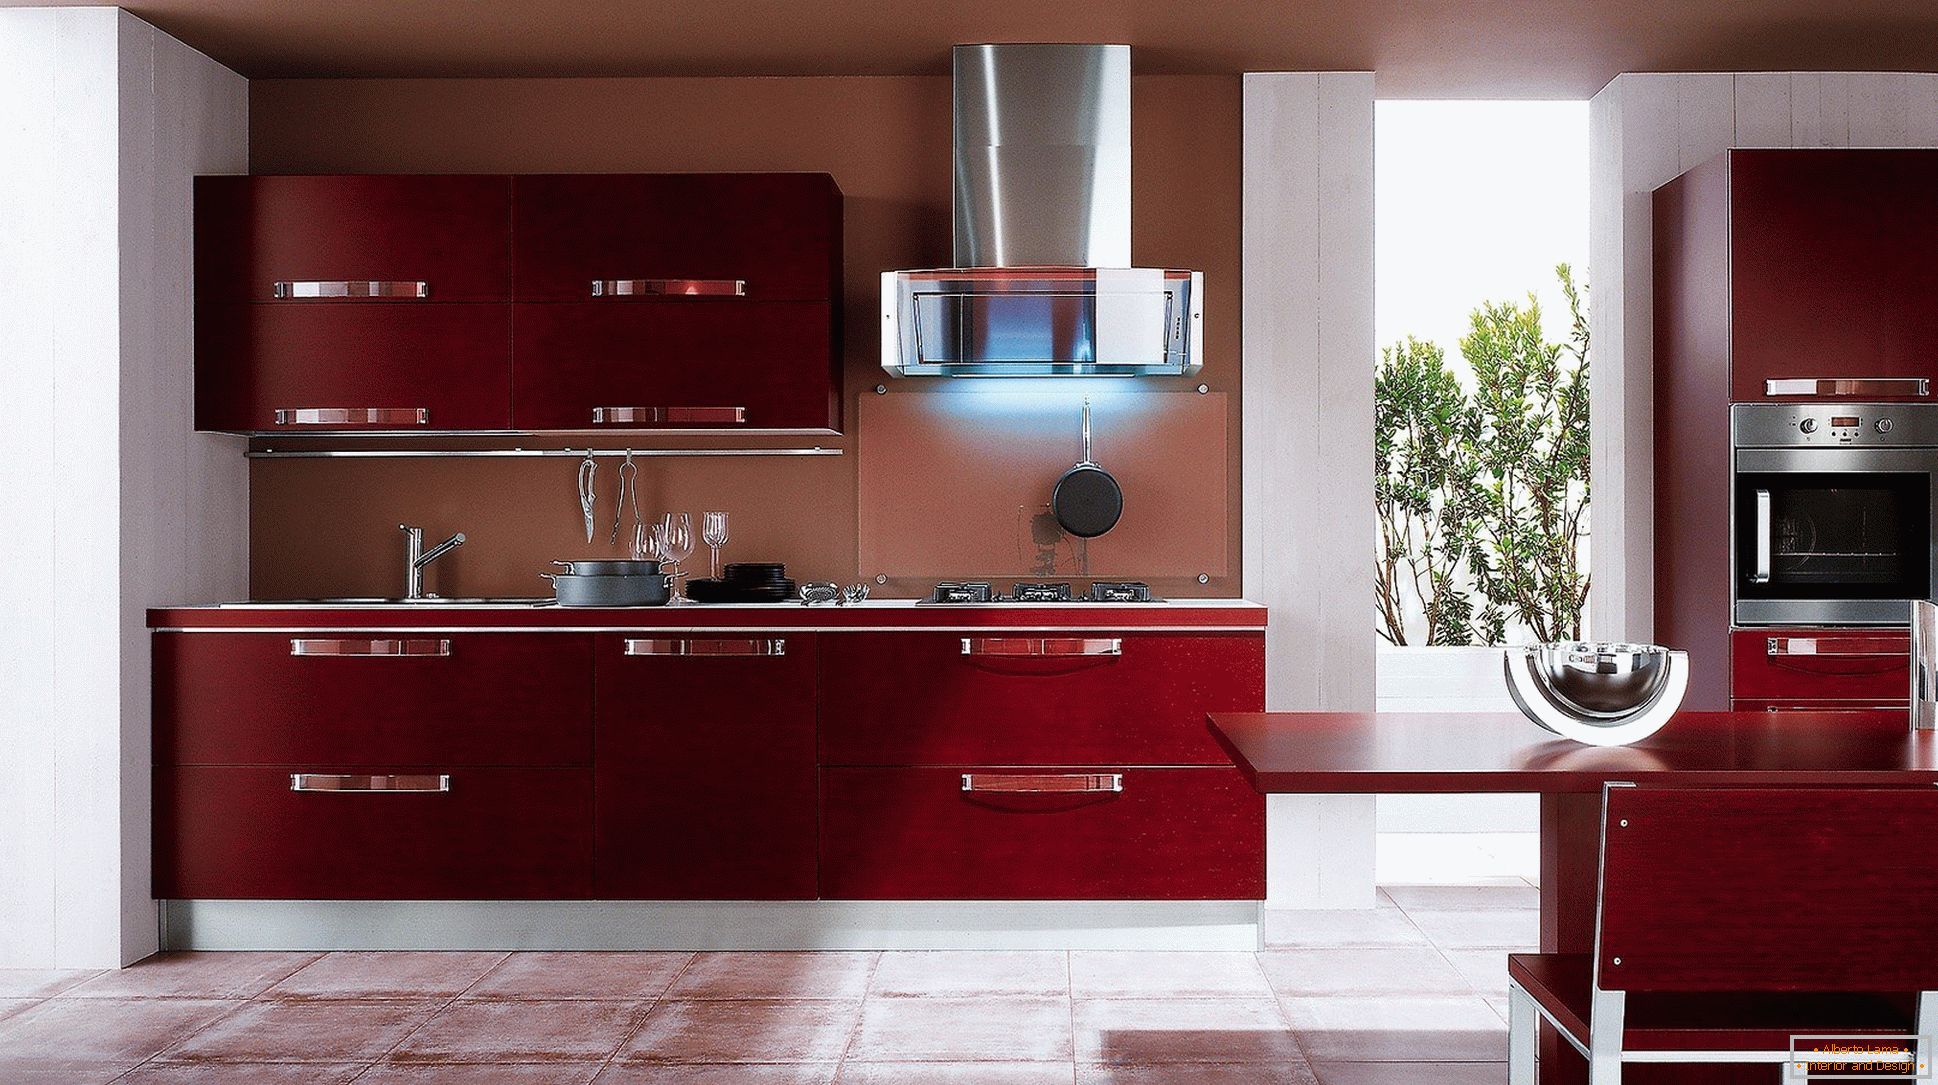 The combination of colors of bordeaux and metallic elements of the kitchen